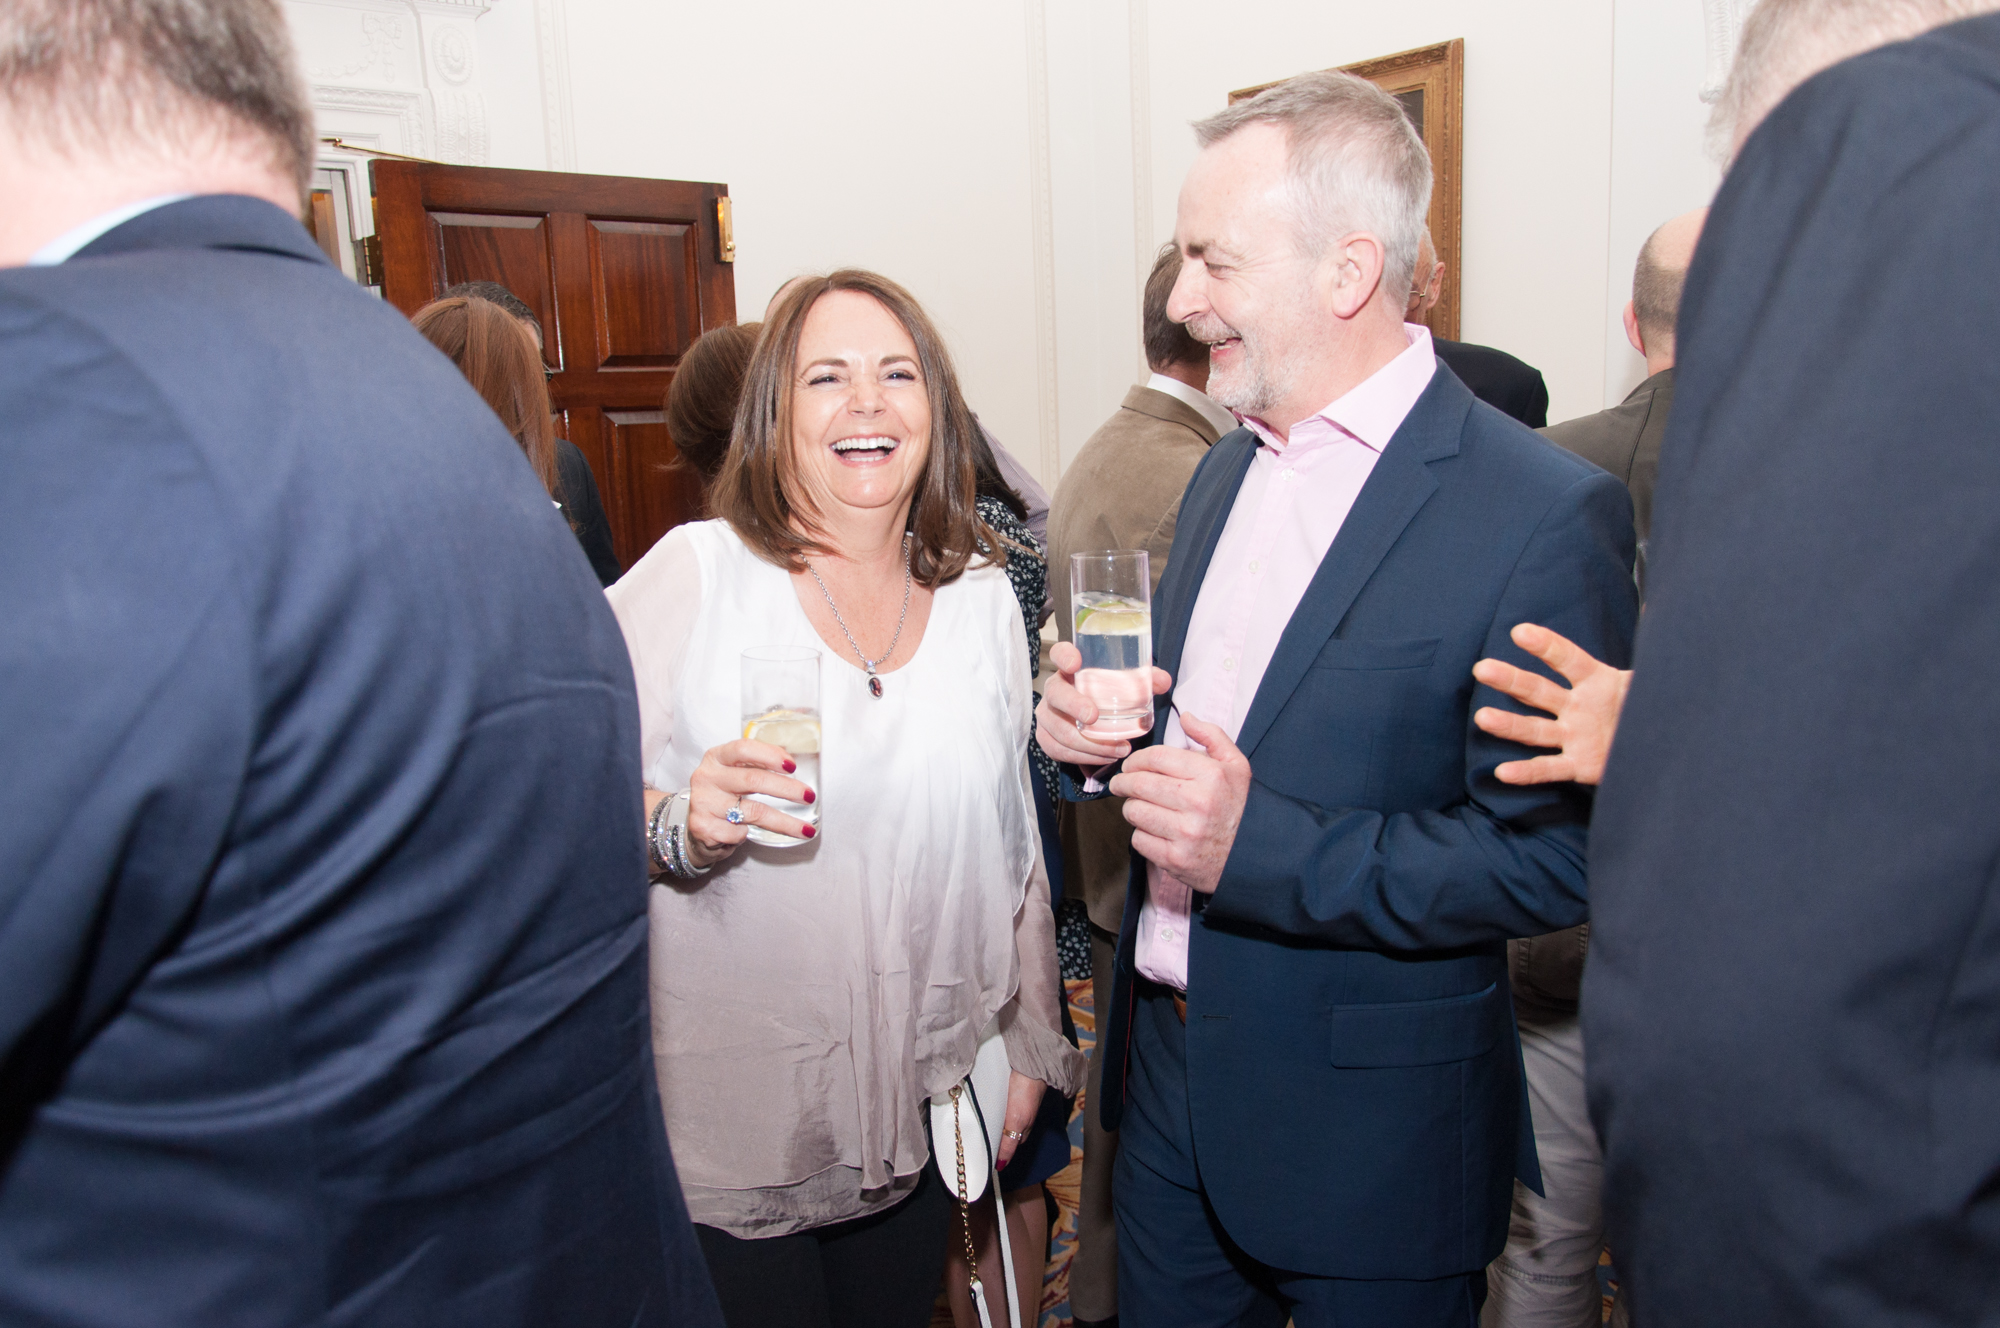 St Gerard's School Past Pupils Union Lunch at Shelbourne Hotel by Natalia Marzec_ low res63